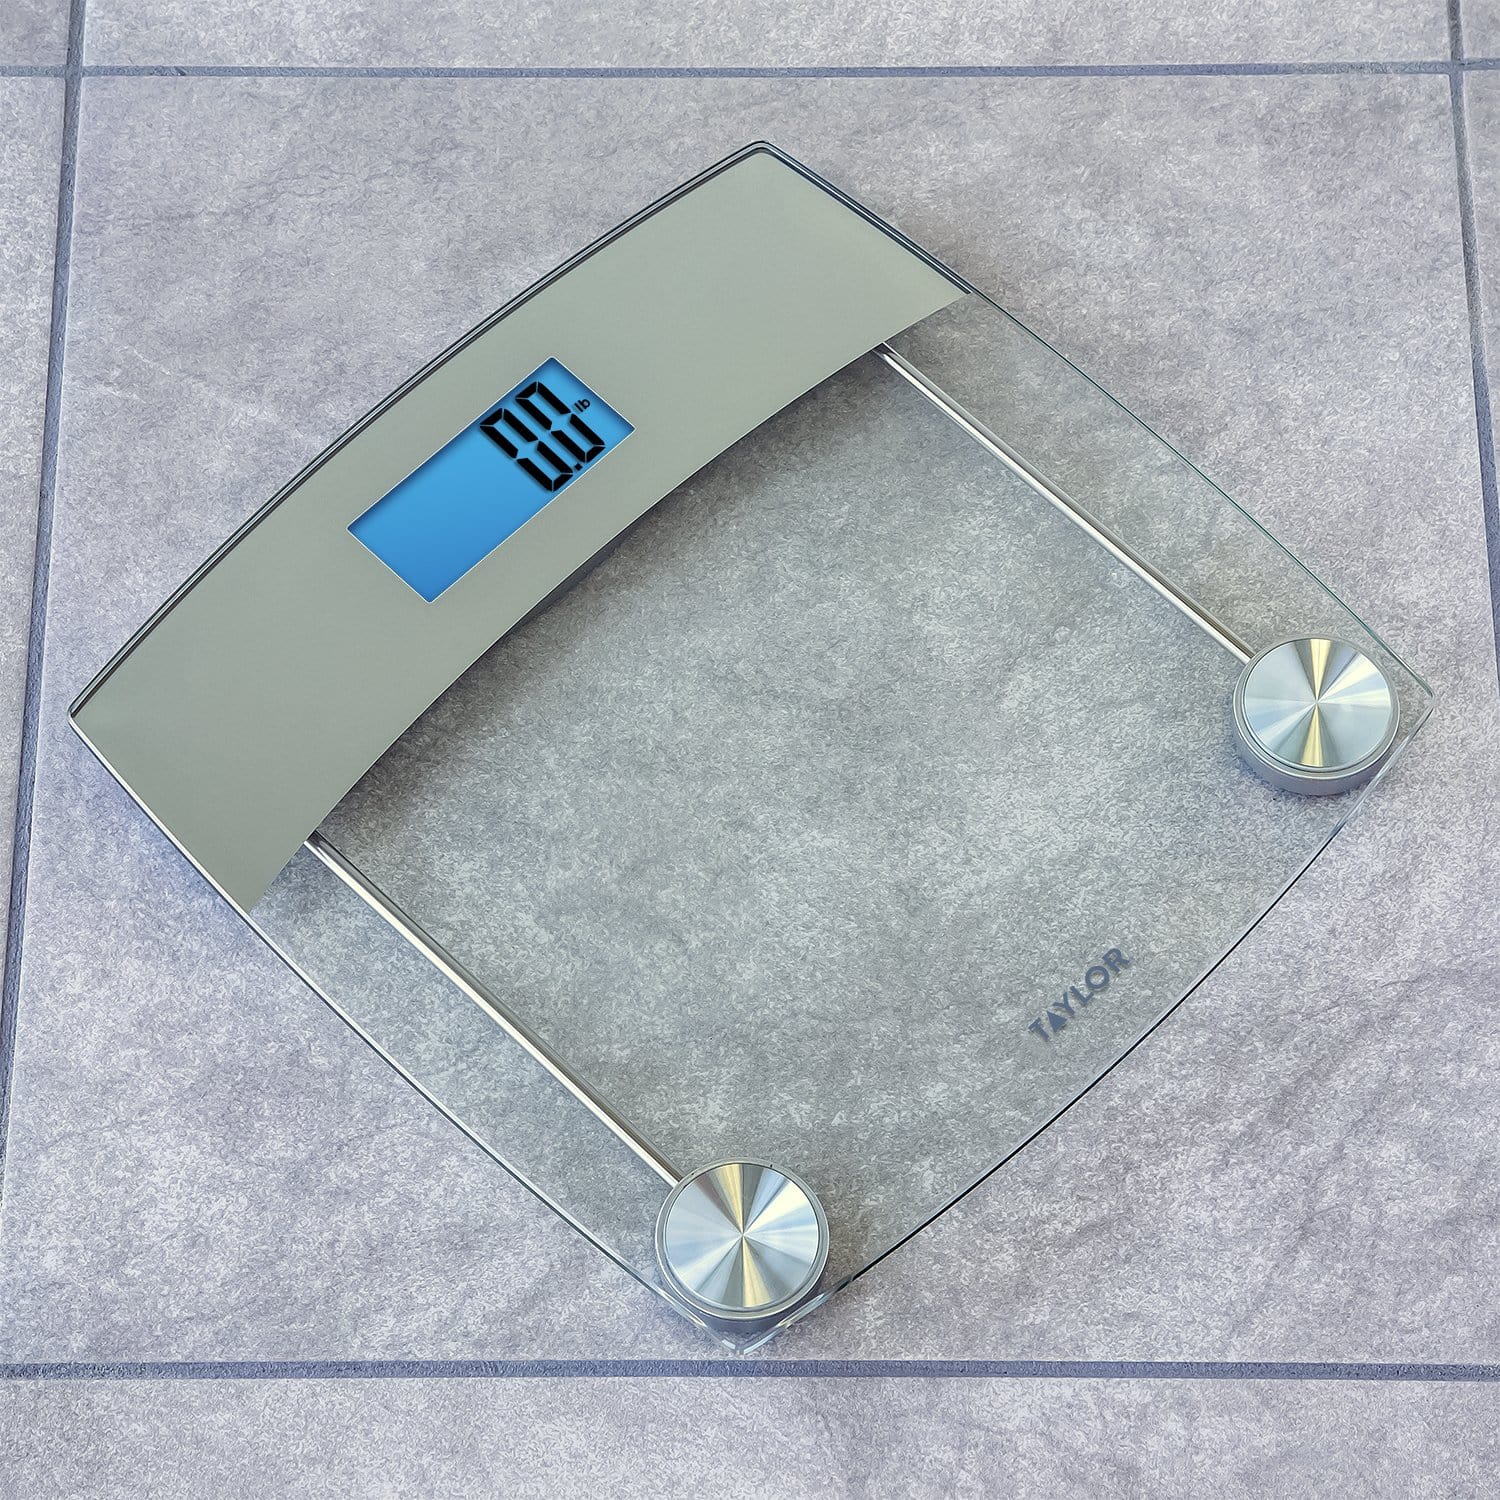 Glass Body Composition Personal Scale Blue - Taylor